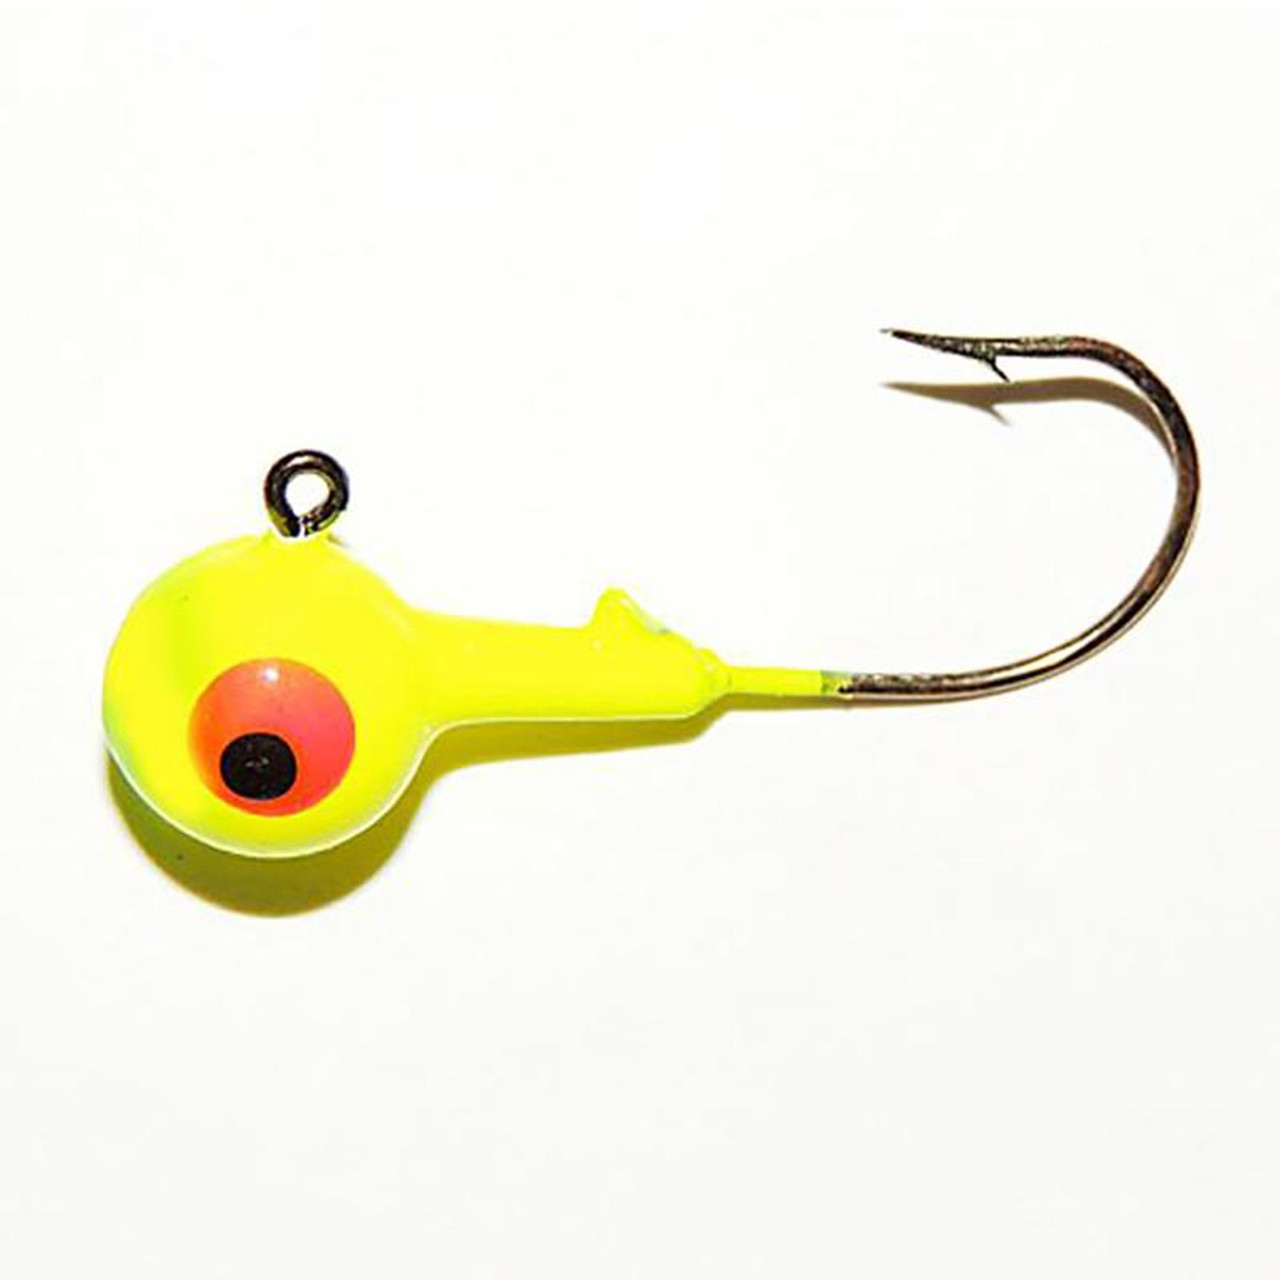 Roundhead Jig (1/16 oz - #4 Hook) - 10 Pack - Chartreuse - Ramsey Outdoor